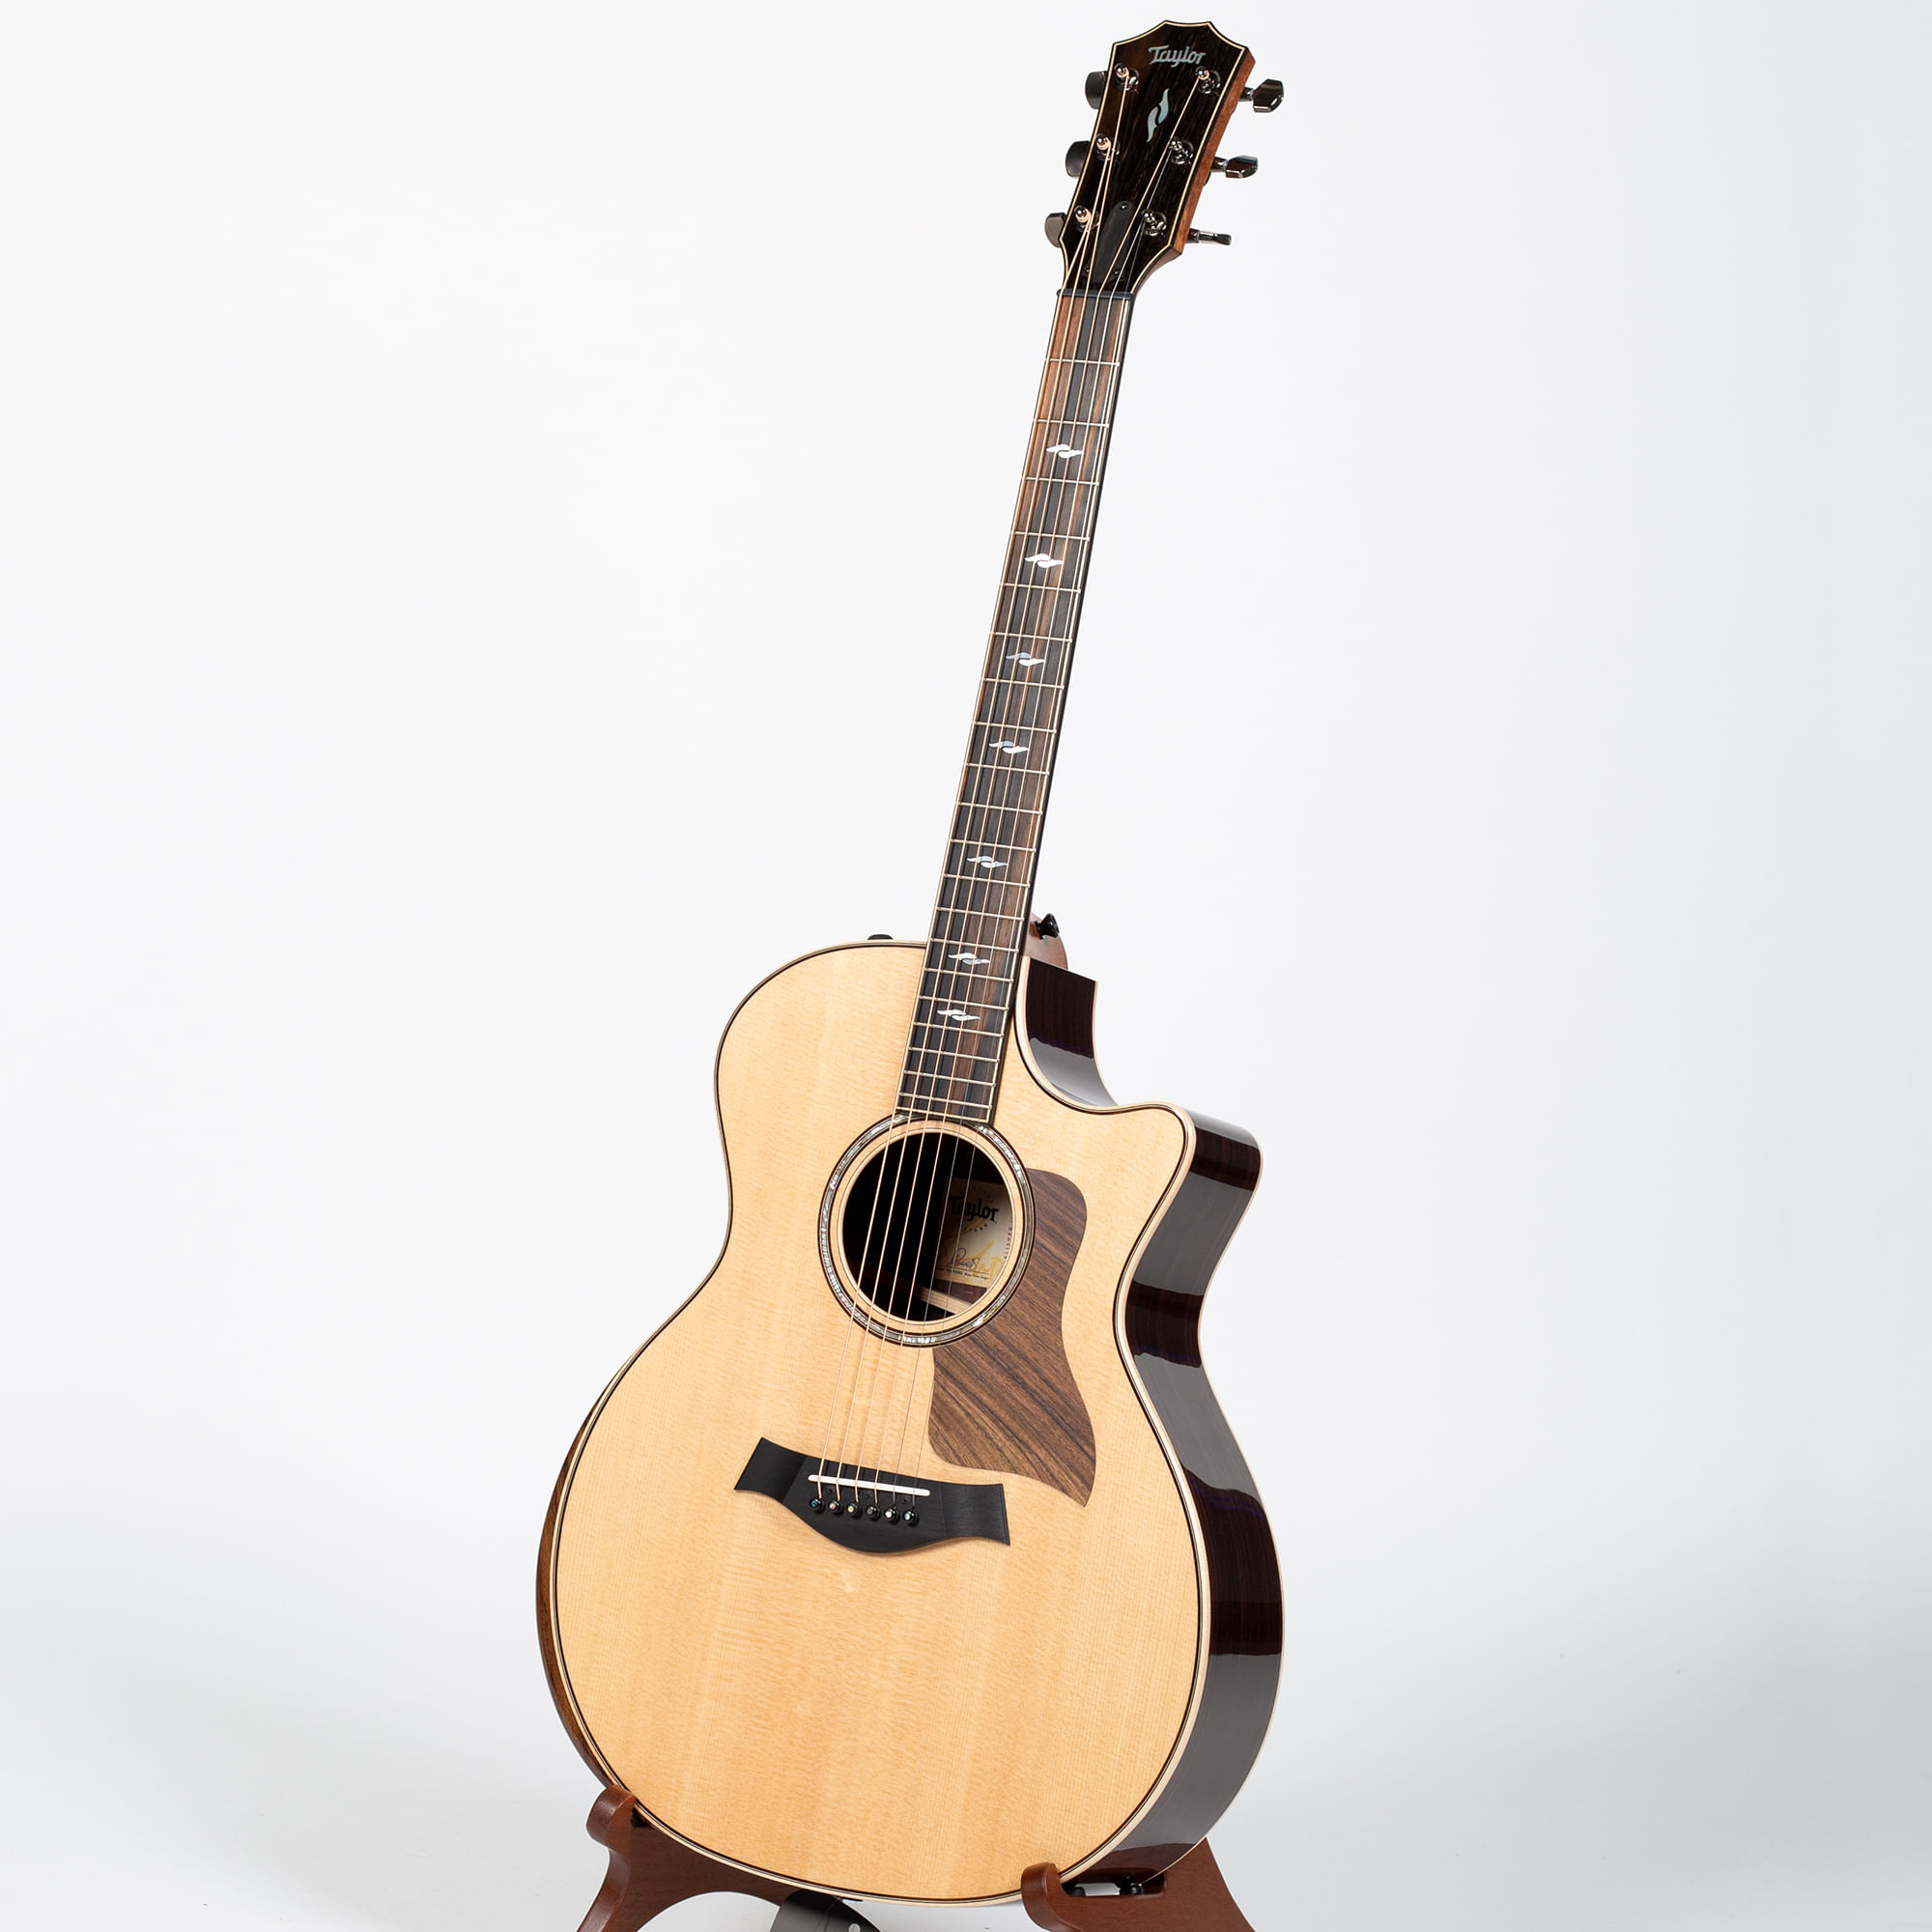 Taylor 814ce - Sitka Spruce / Indian Rosewood - Cosmo Music